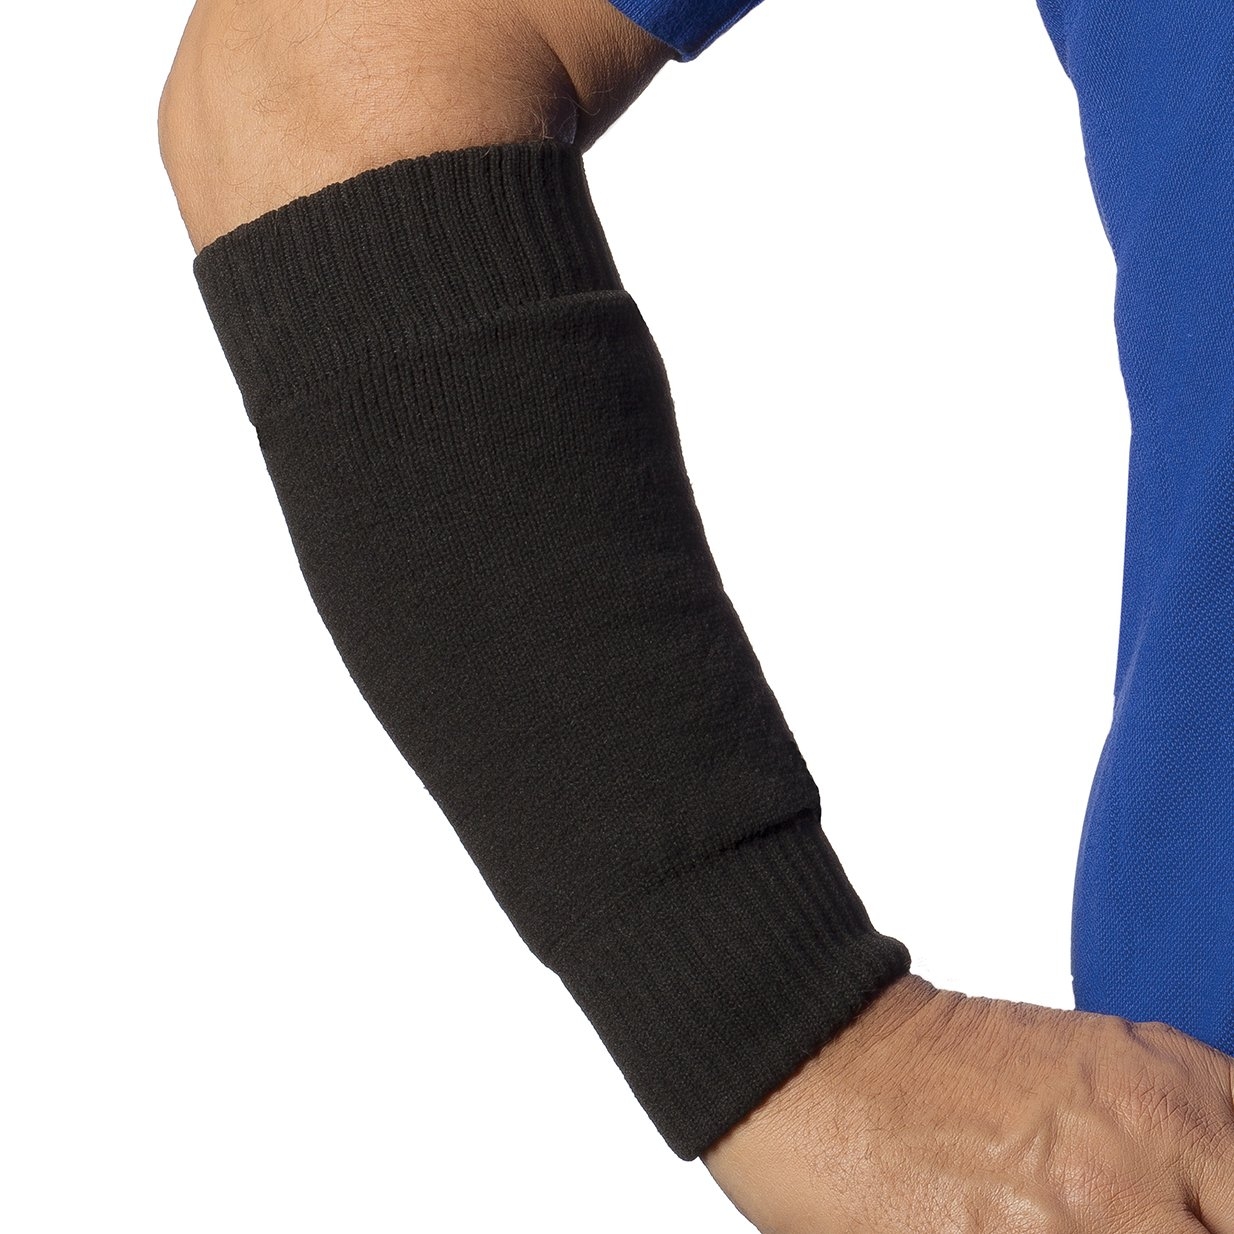 Forearm protectors for thin skin – Light Weight – Protect Frail Skin Black – Limb Keepers